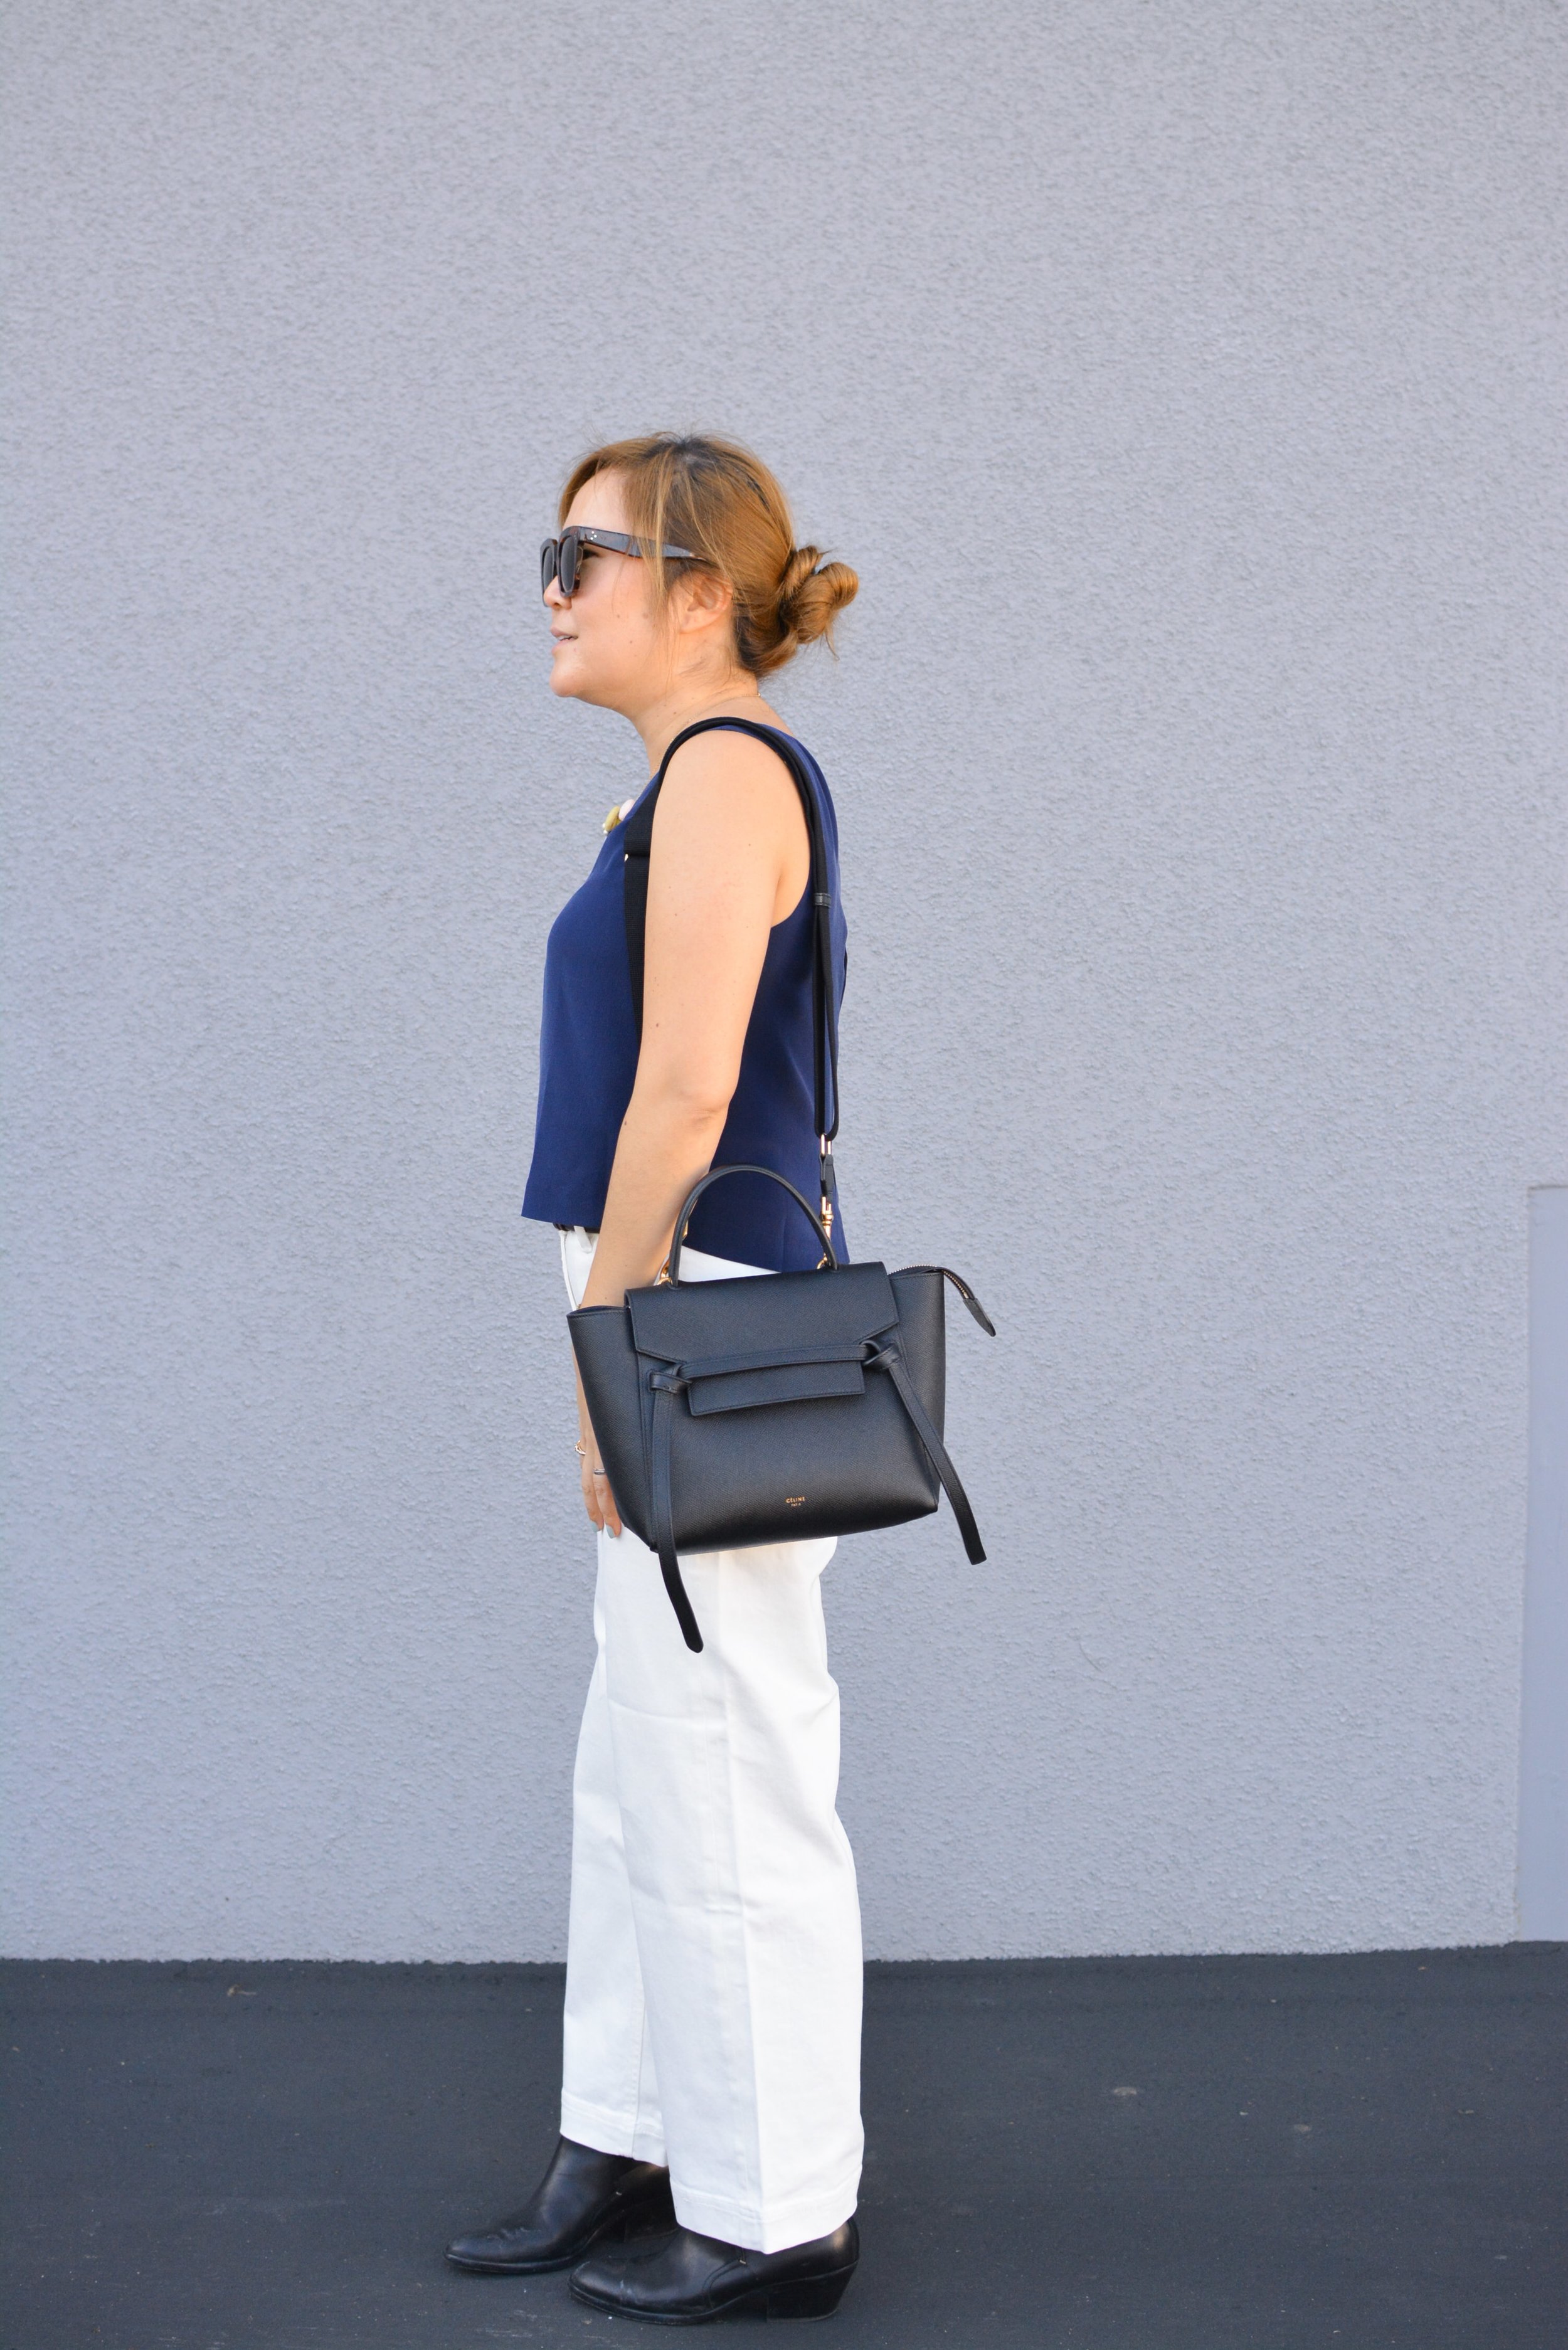 Celine Sangle Bucket Bag in Greige - More Than You Can Imagine